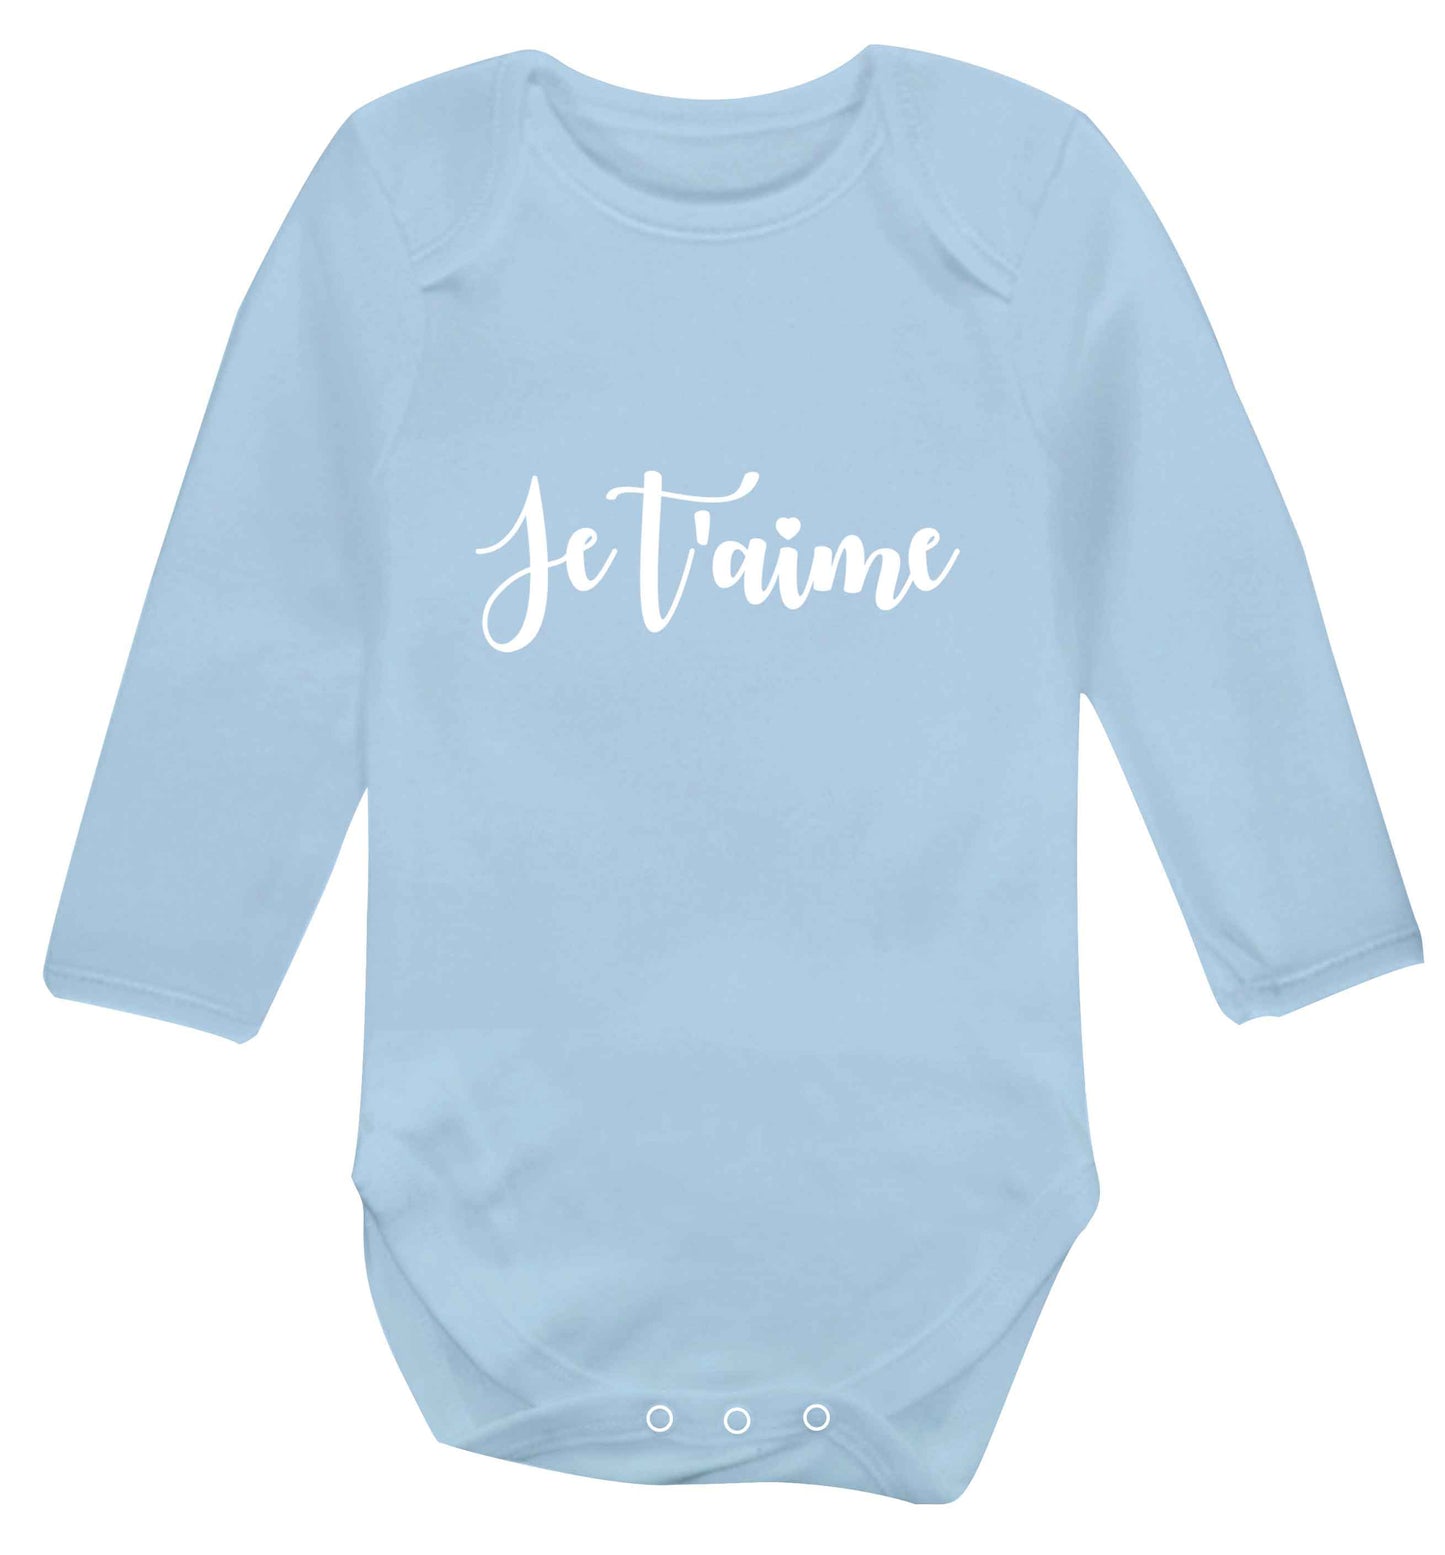 Je t'aime baby vest long sleeved pale blue 6-12 months